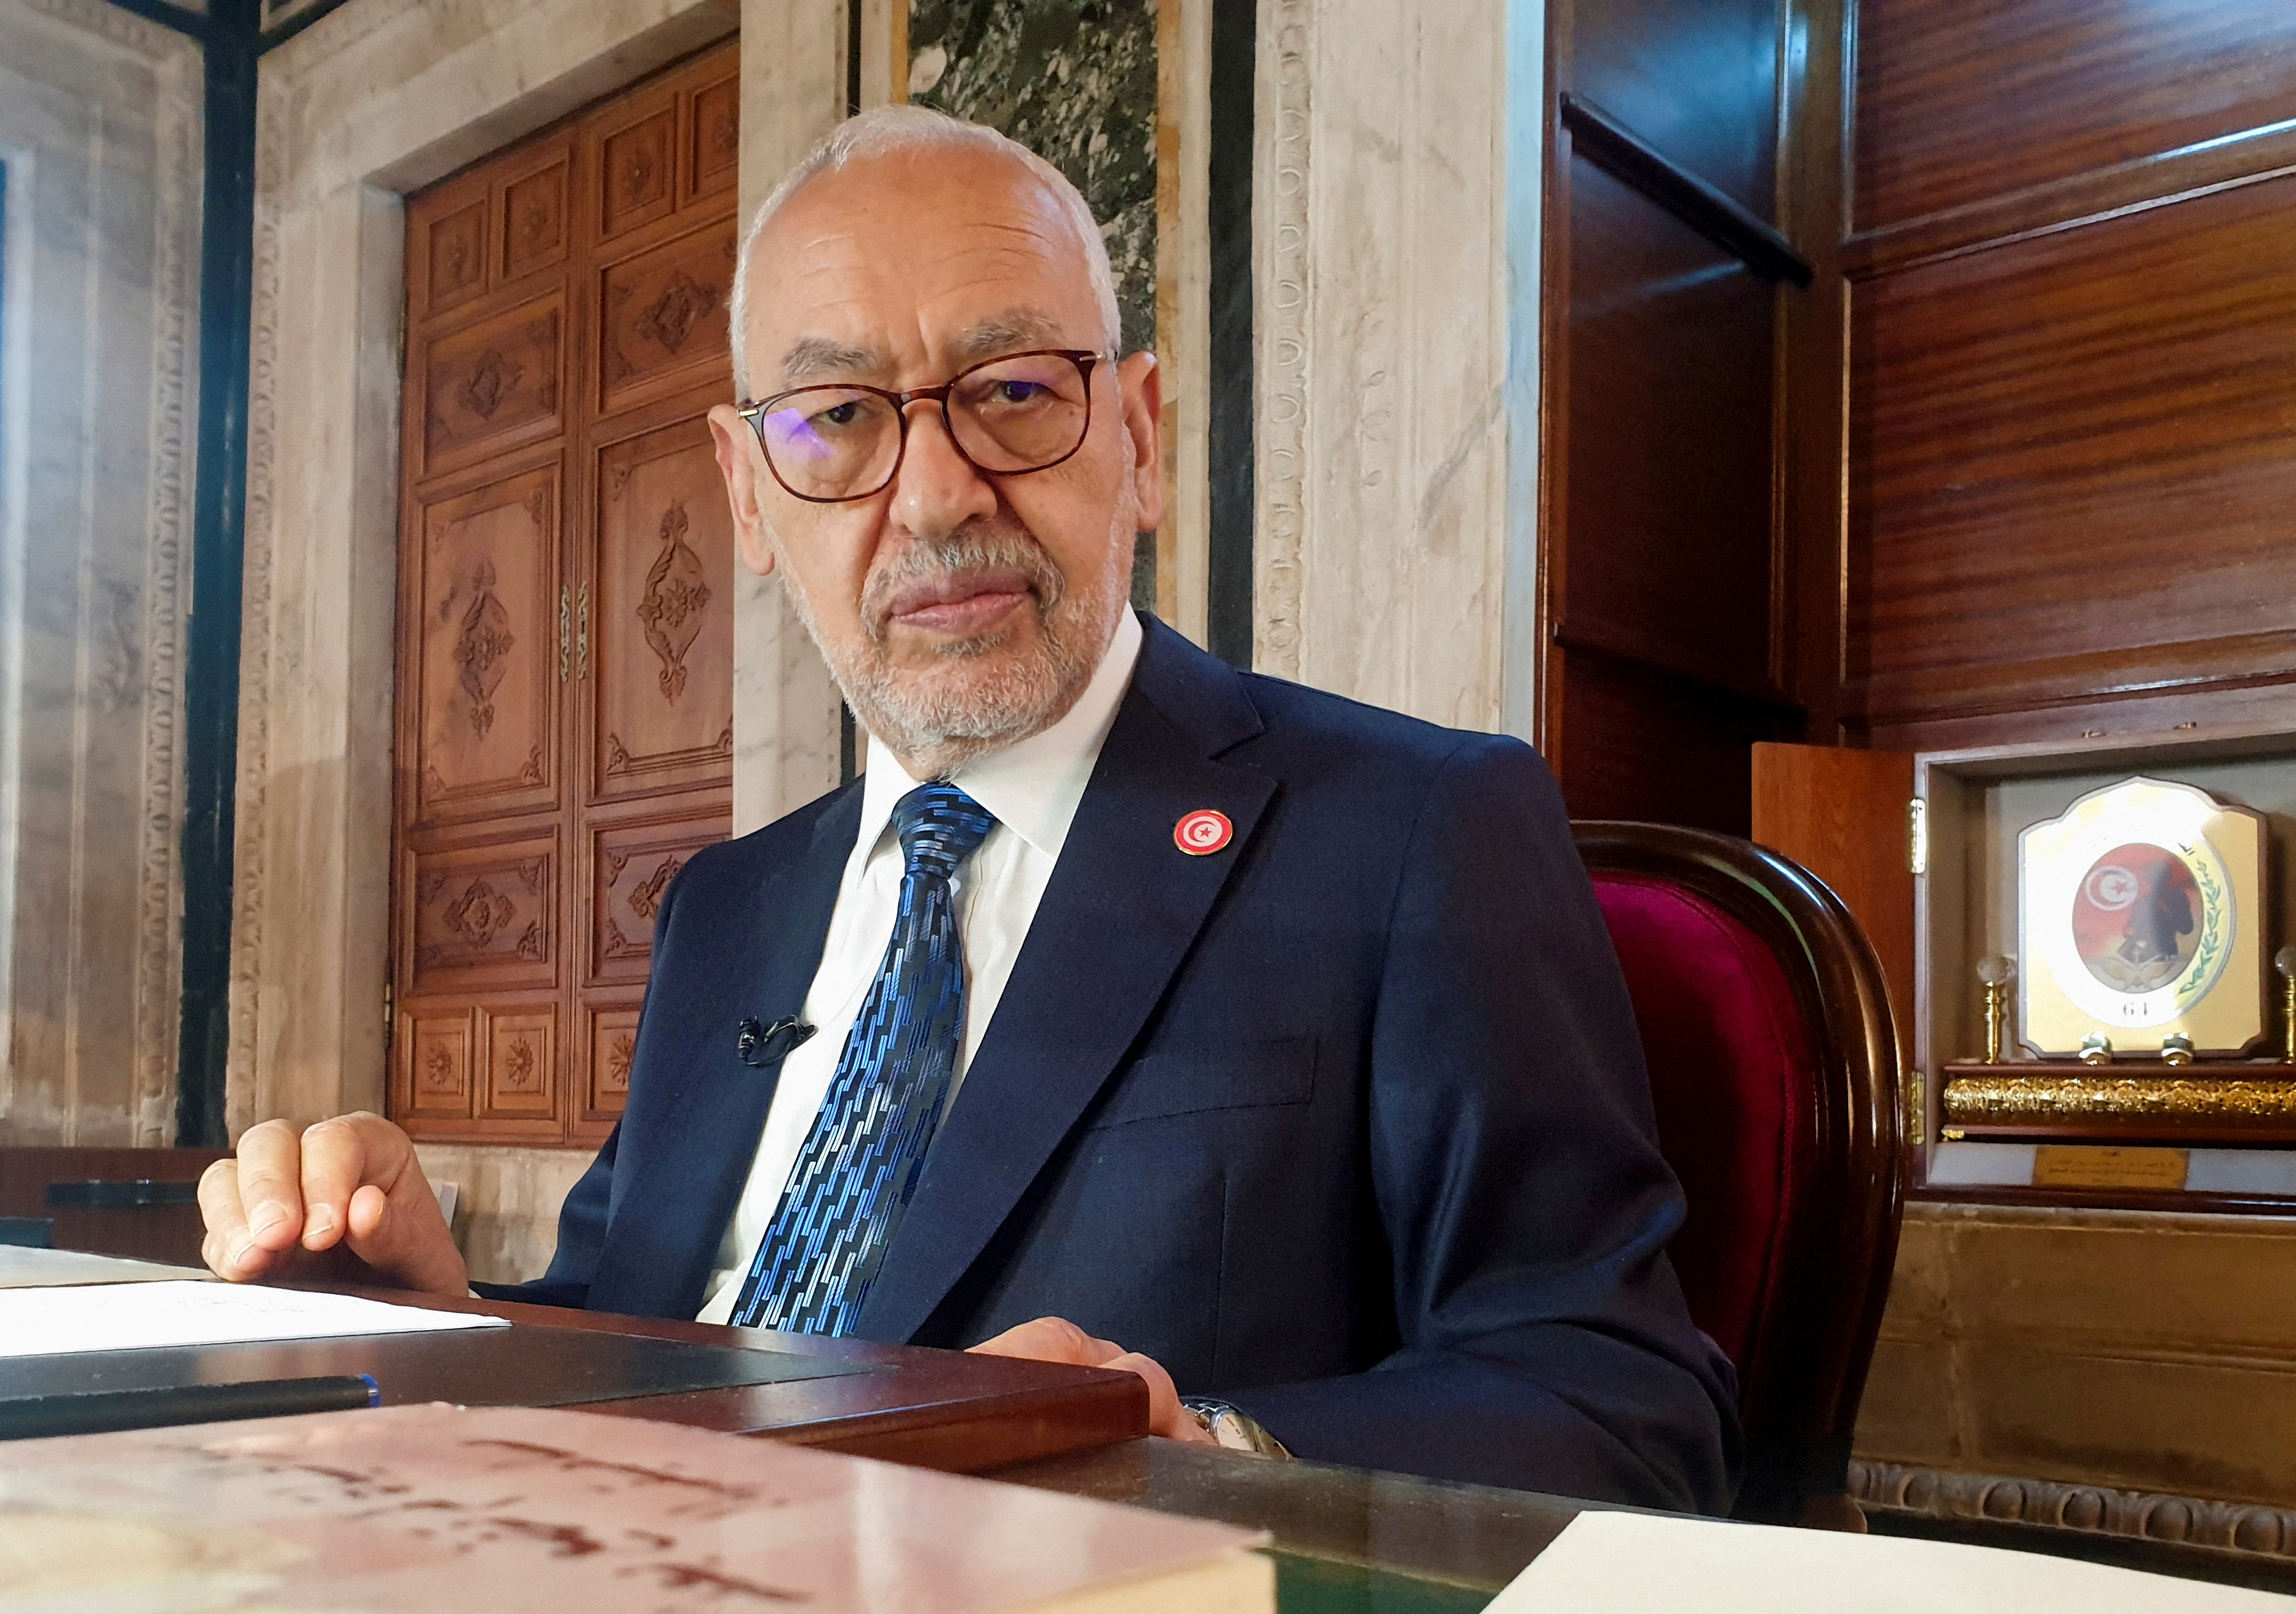 Parliament Speaker Rached Ghannouchi poses during an interview with Reuters in his office, in Tunis